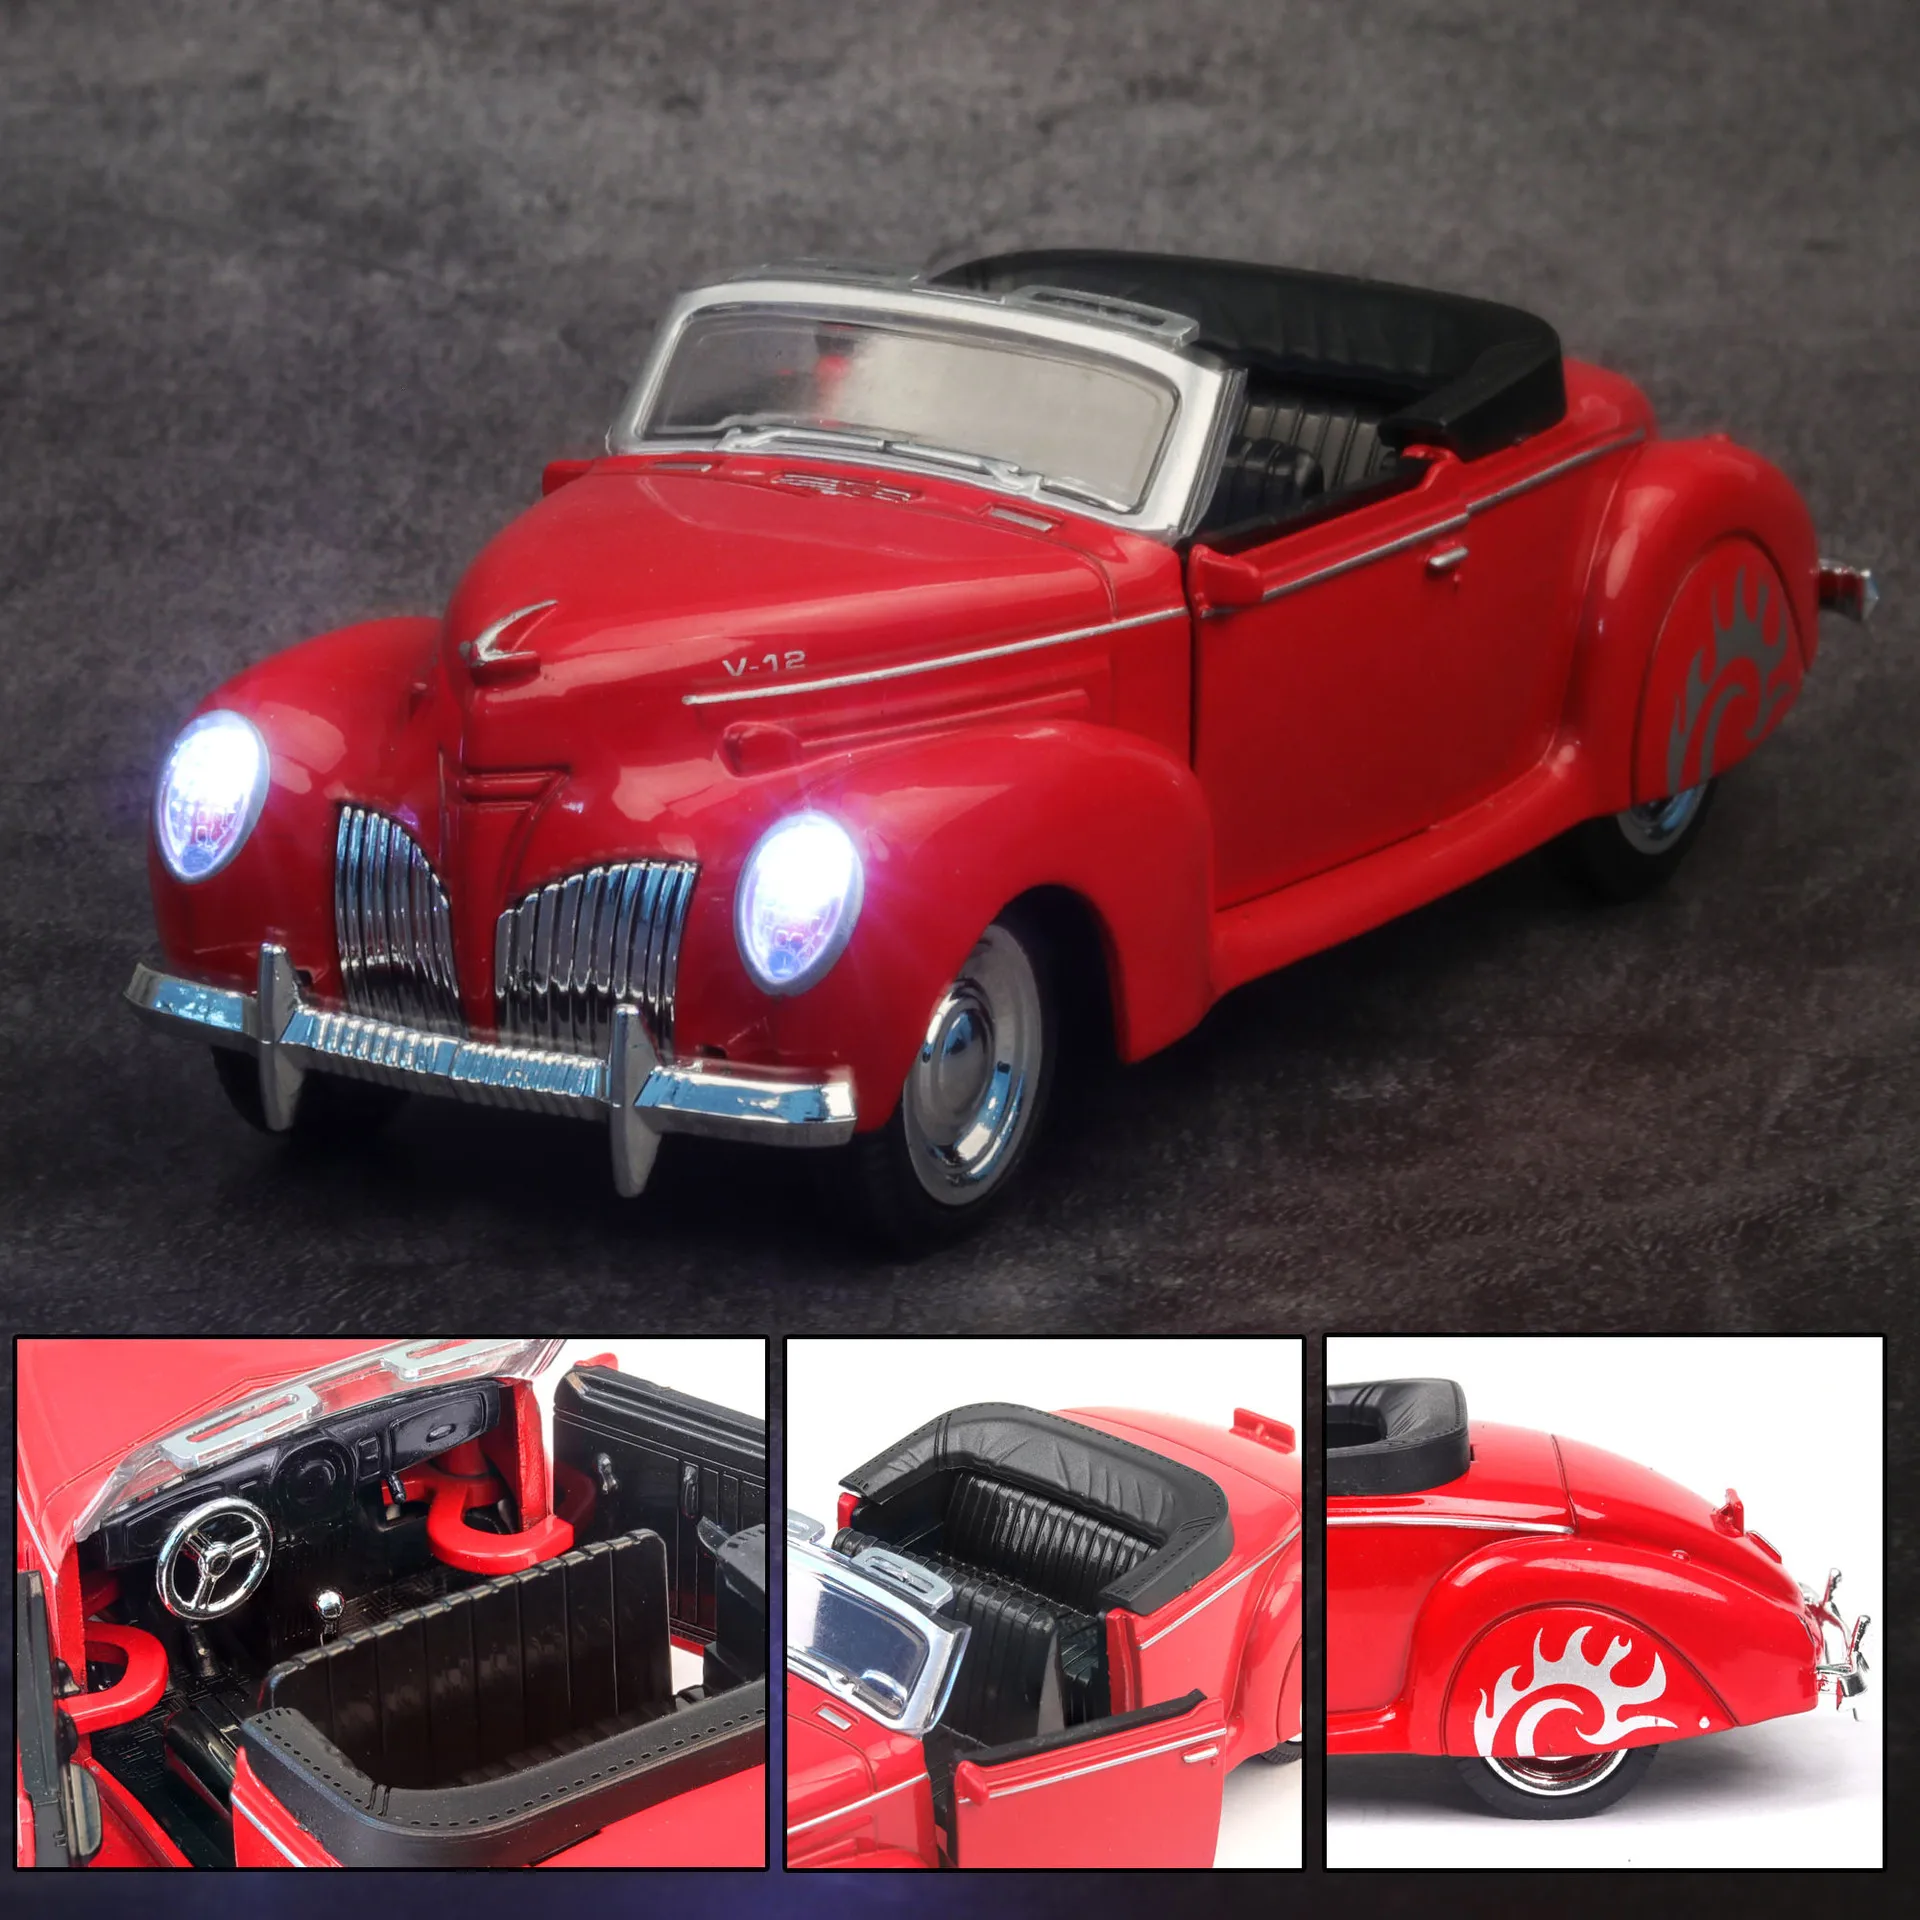 Best selling 1:38 Lincoln convertible classic car alloy model,die-casting sound and light pull back classic car,free shipping images - 6